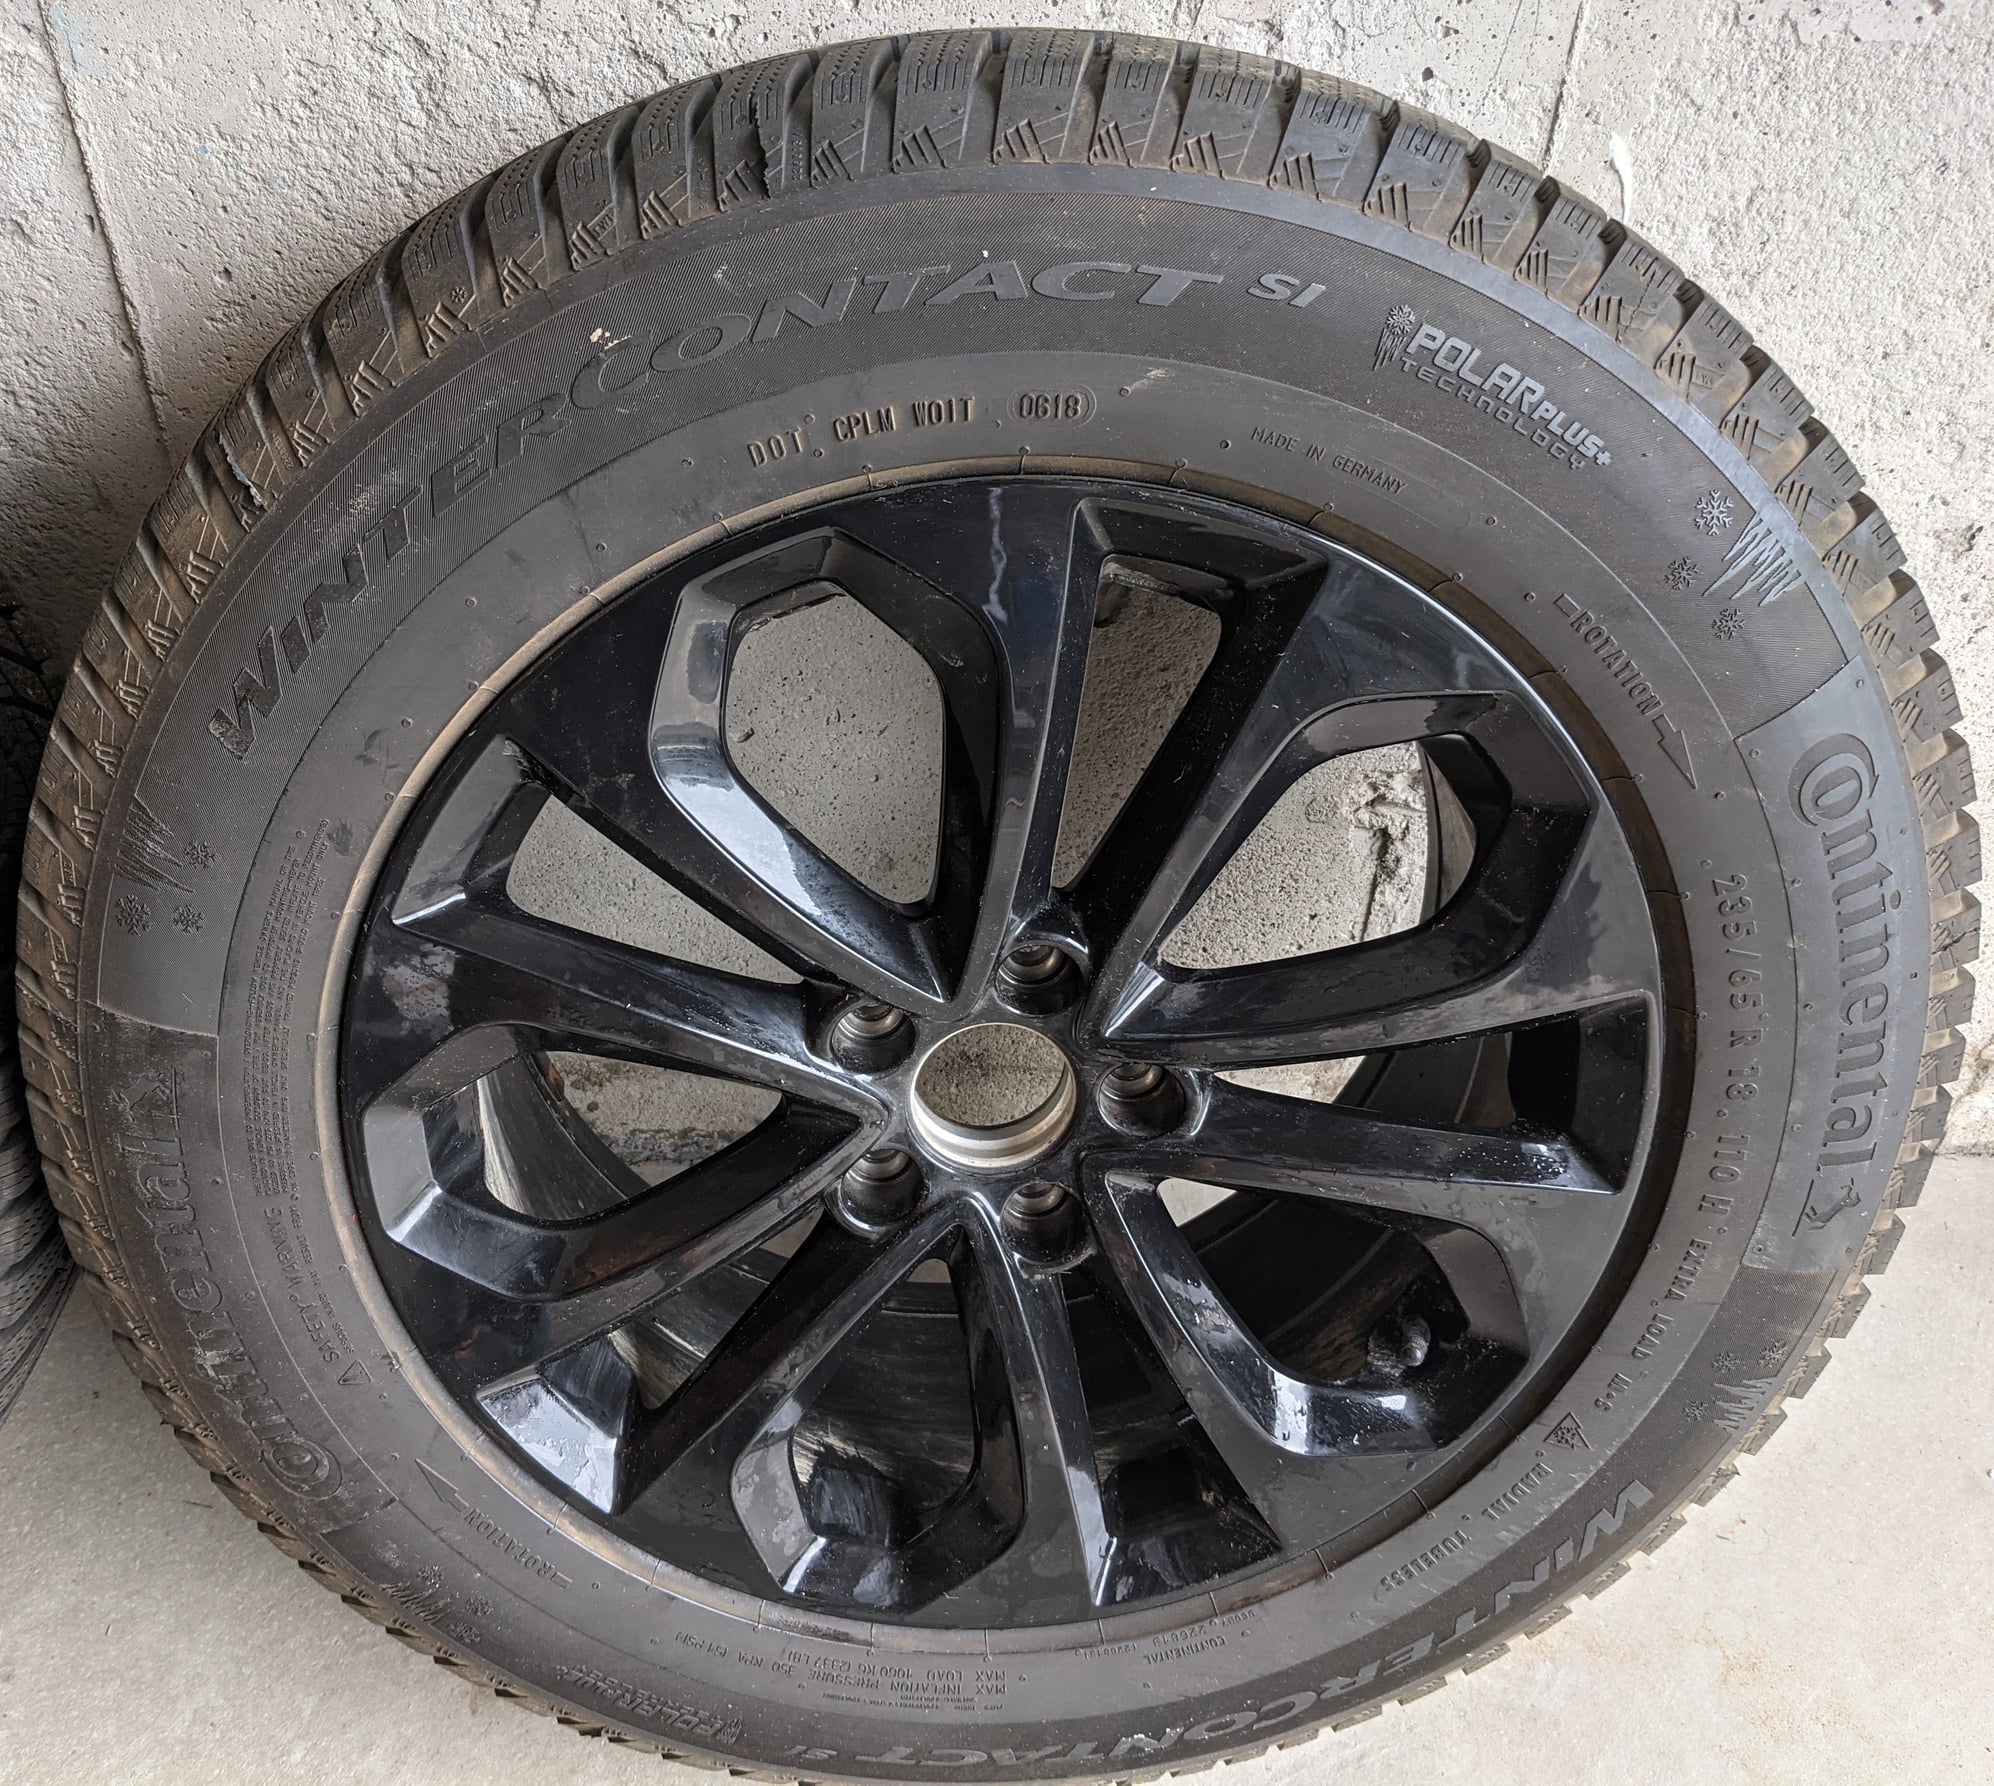 Wheels and Tires/Axles - FS: Acura RDX winter tires and wheels pkg equipped with TPMS (only used for 1 season) - Used - 2019 to 2021 Acura RDX - Kitchener, ON N2R0A7, Canada